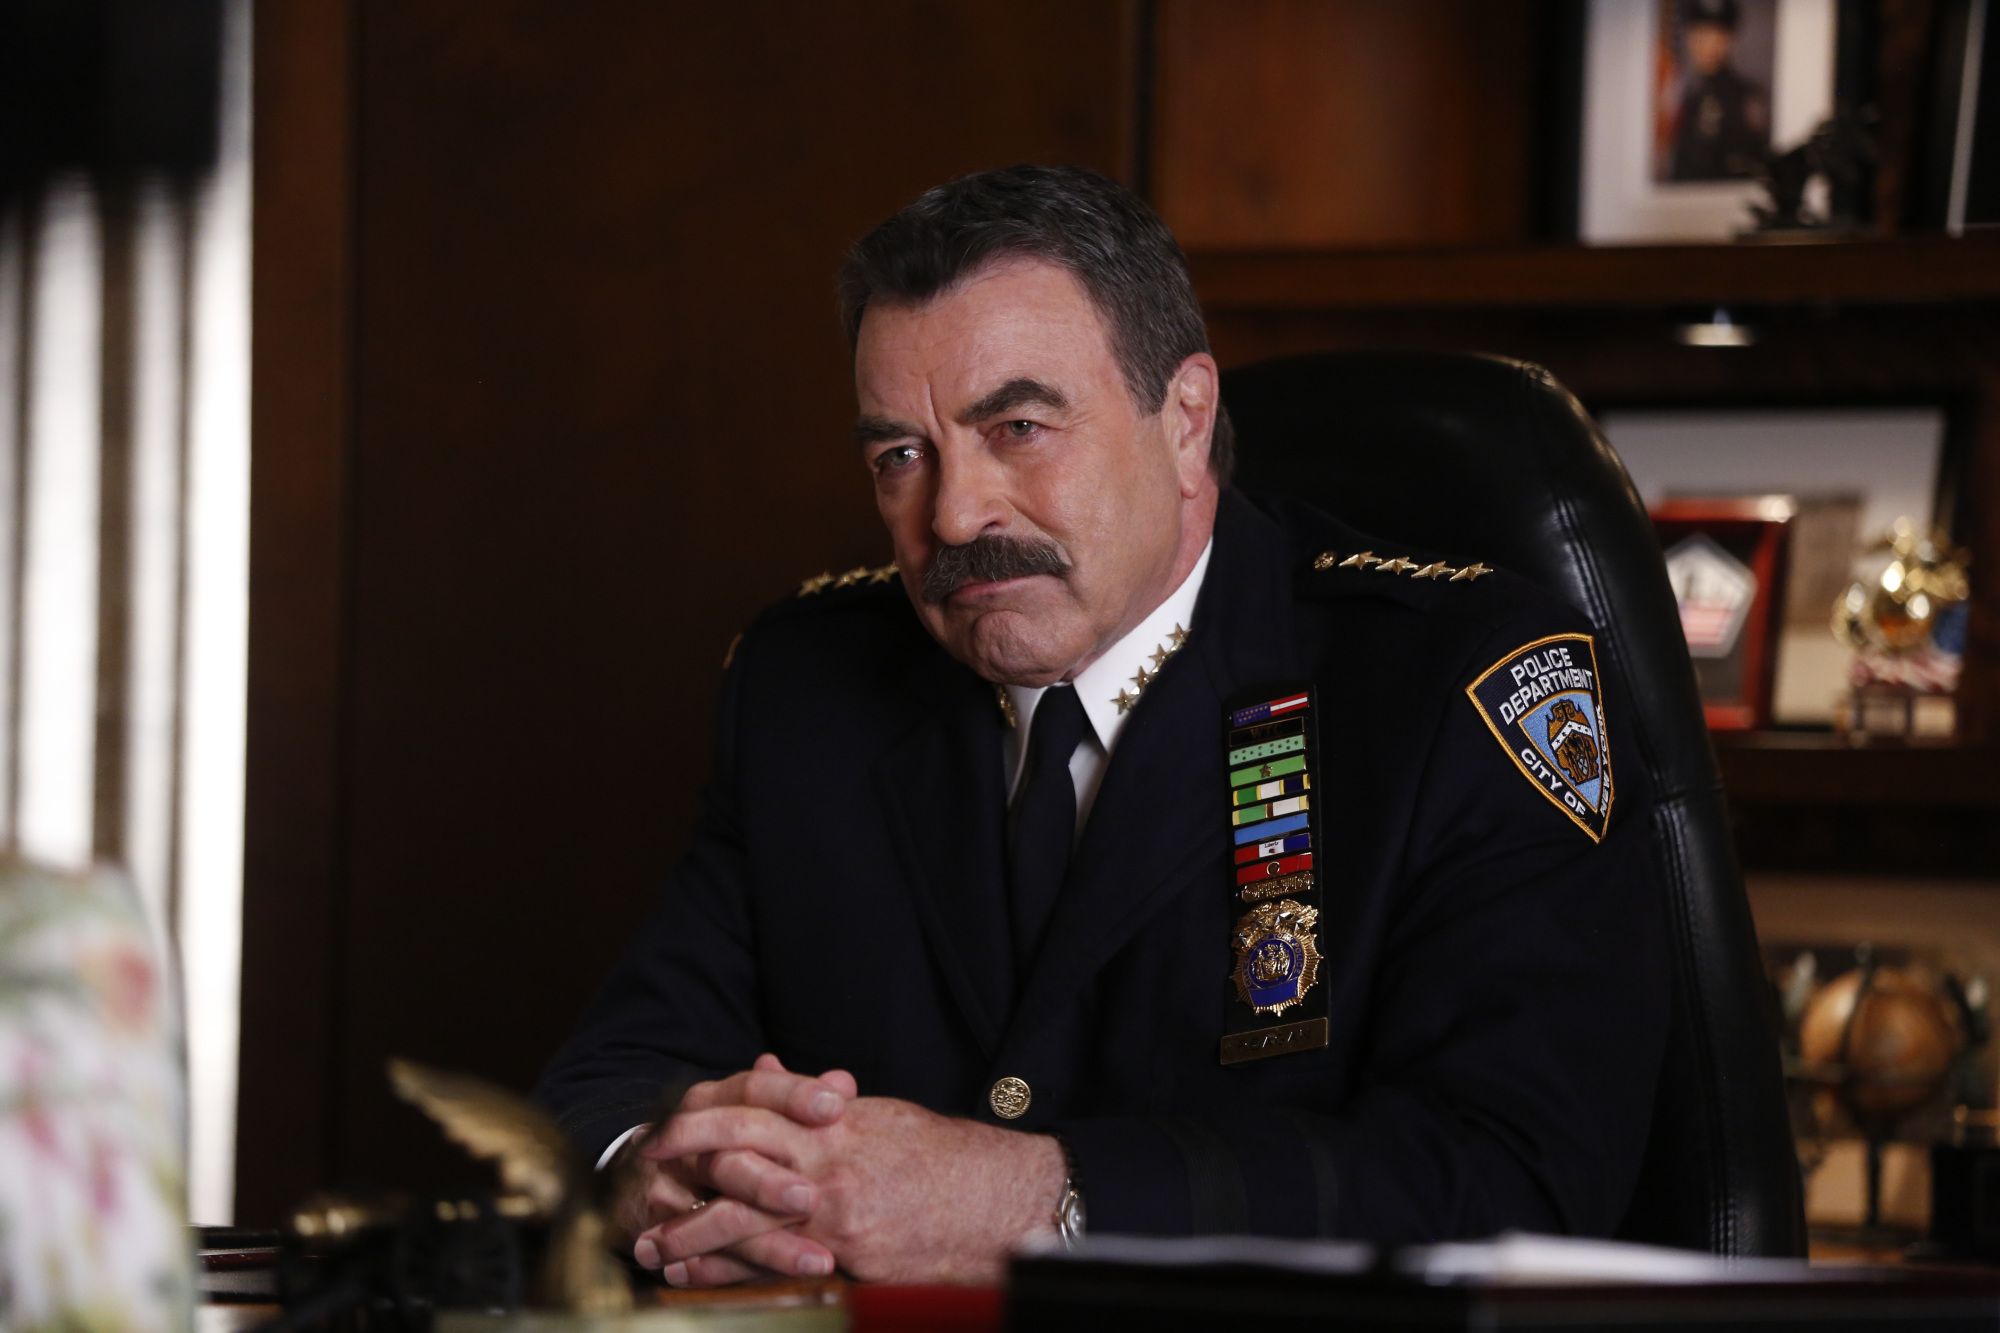  Tom Selleck on the set of CBS hit series "Bluebloods" | Source: Getty Images